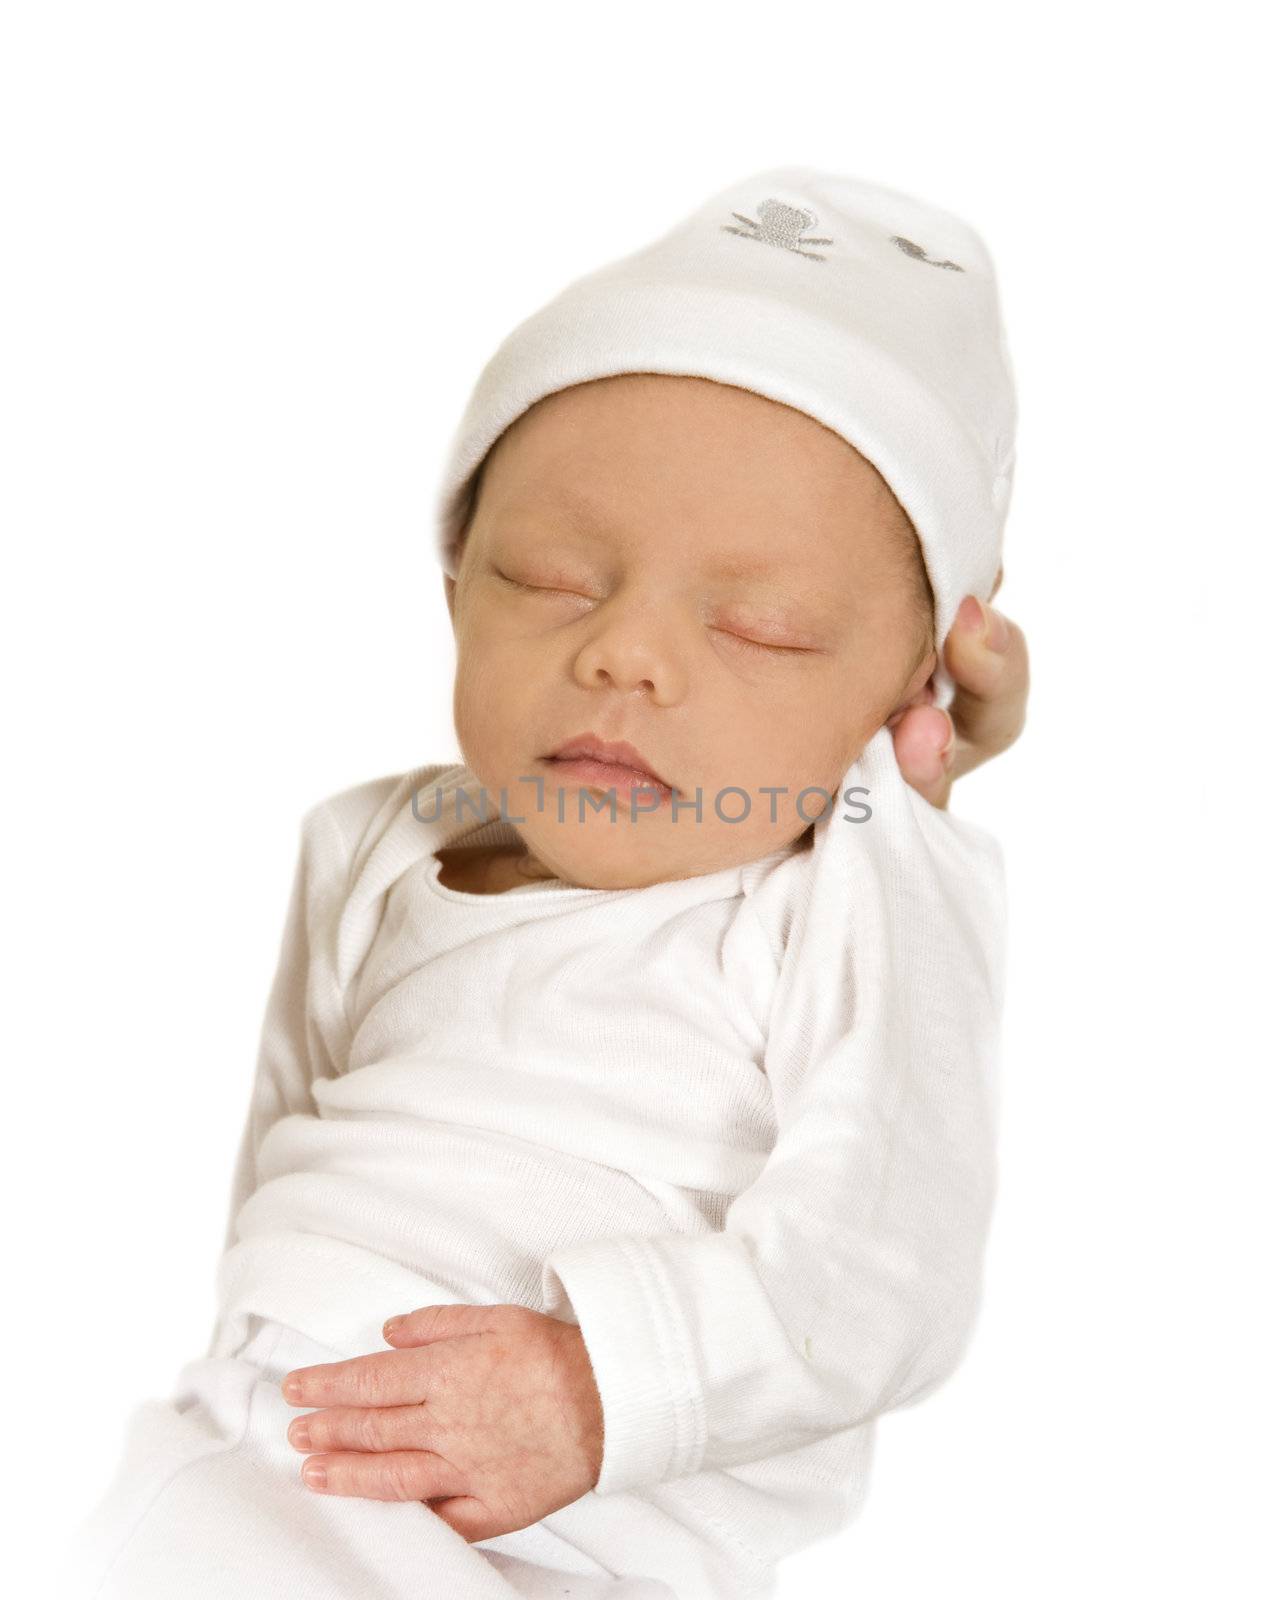 New born baby sleeping peacefully - dressed in white by tish1